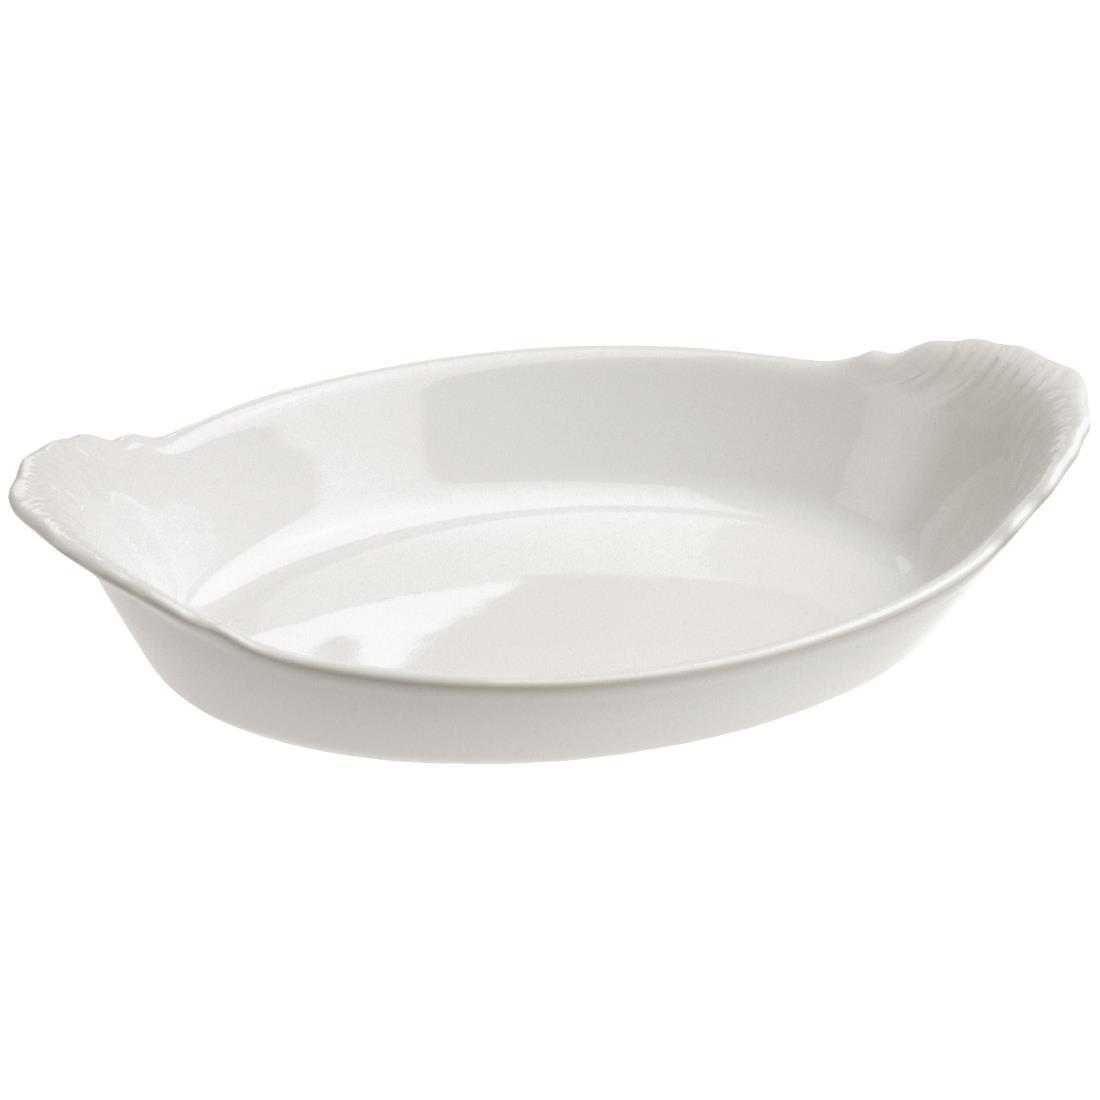 Revol French Classics Oval Eared Dishes 230mm (Pack of 4) - DB342  - 2